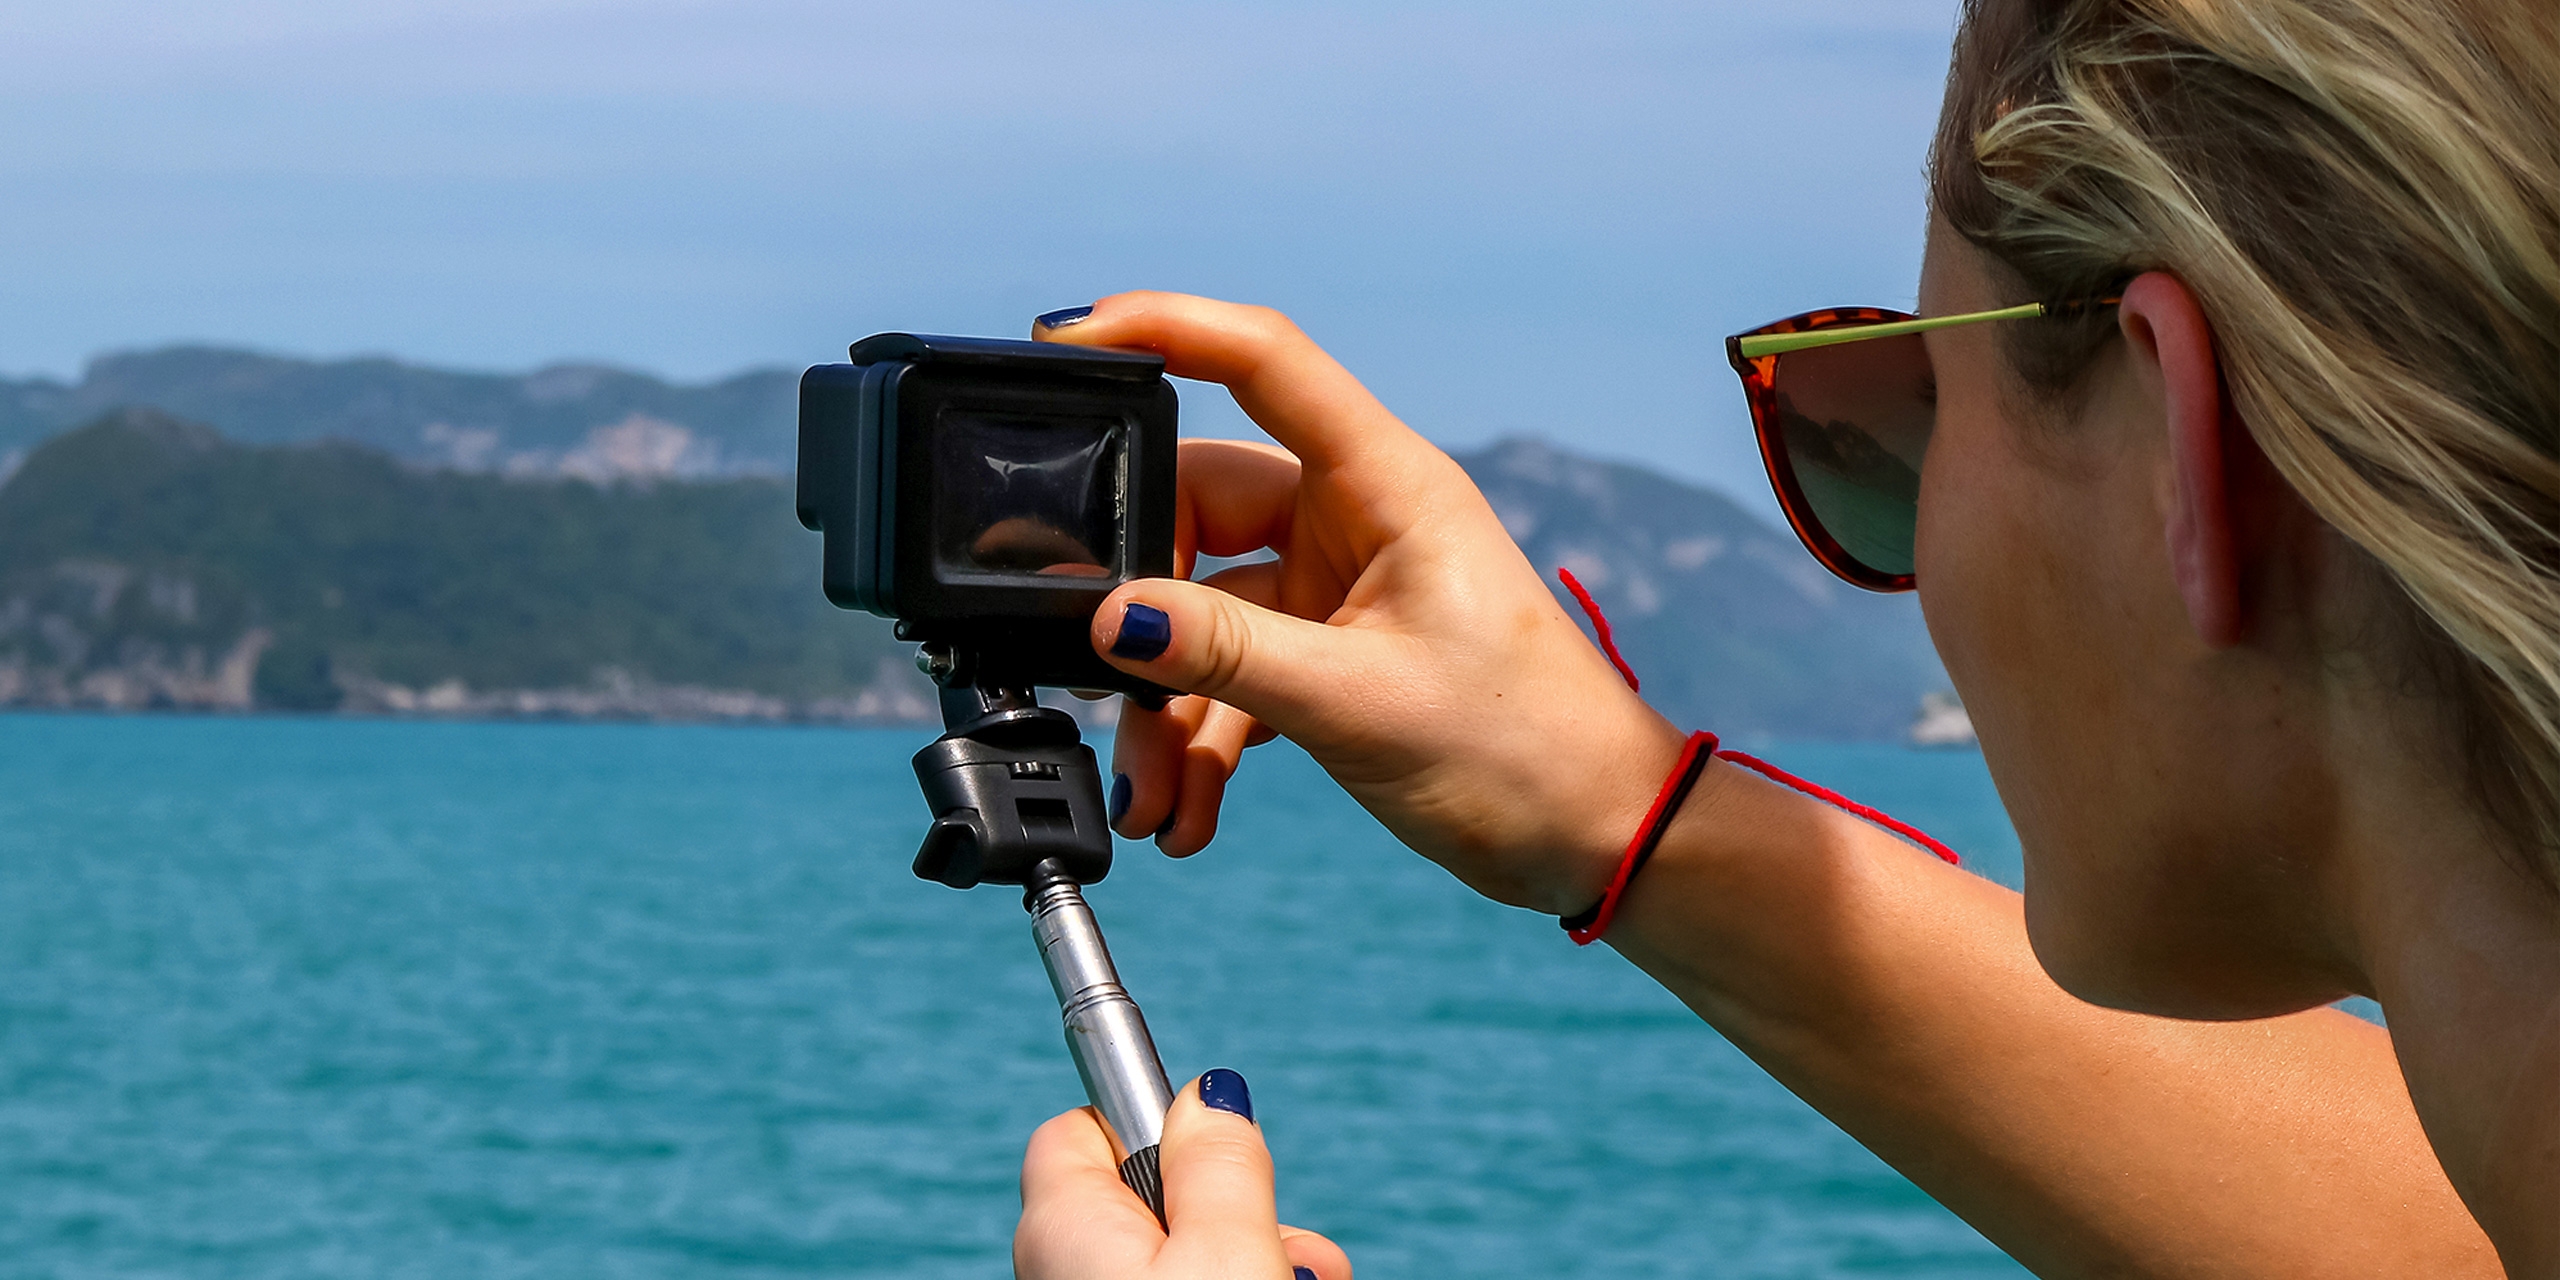 European girl tourists enjoy the GoPro camera and view of the island and the sea on the boat.